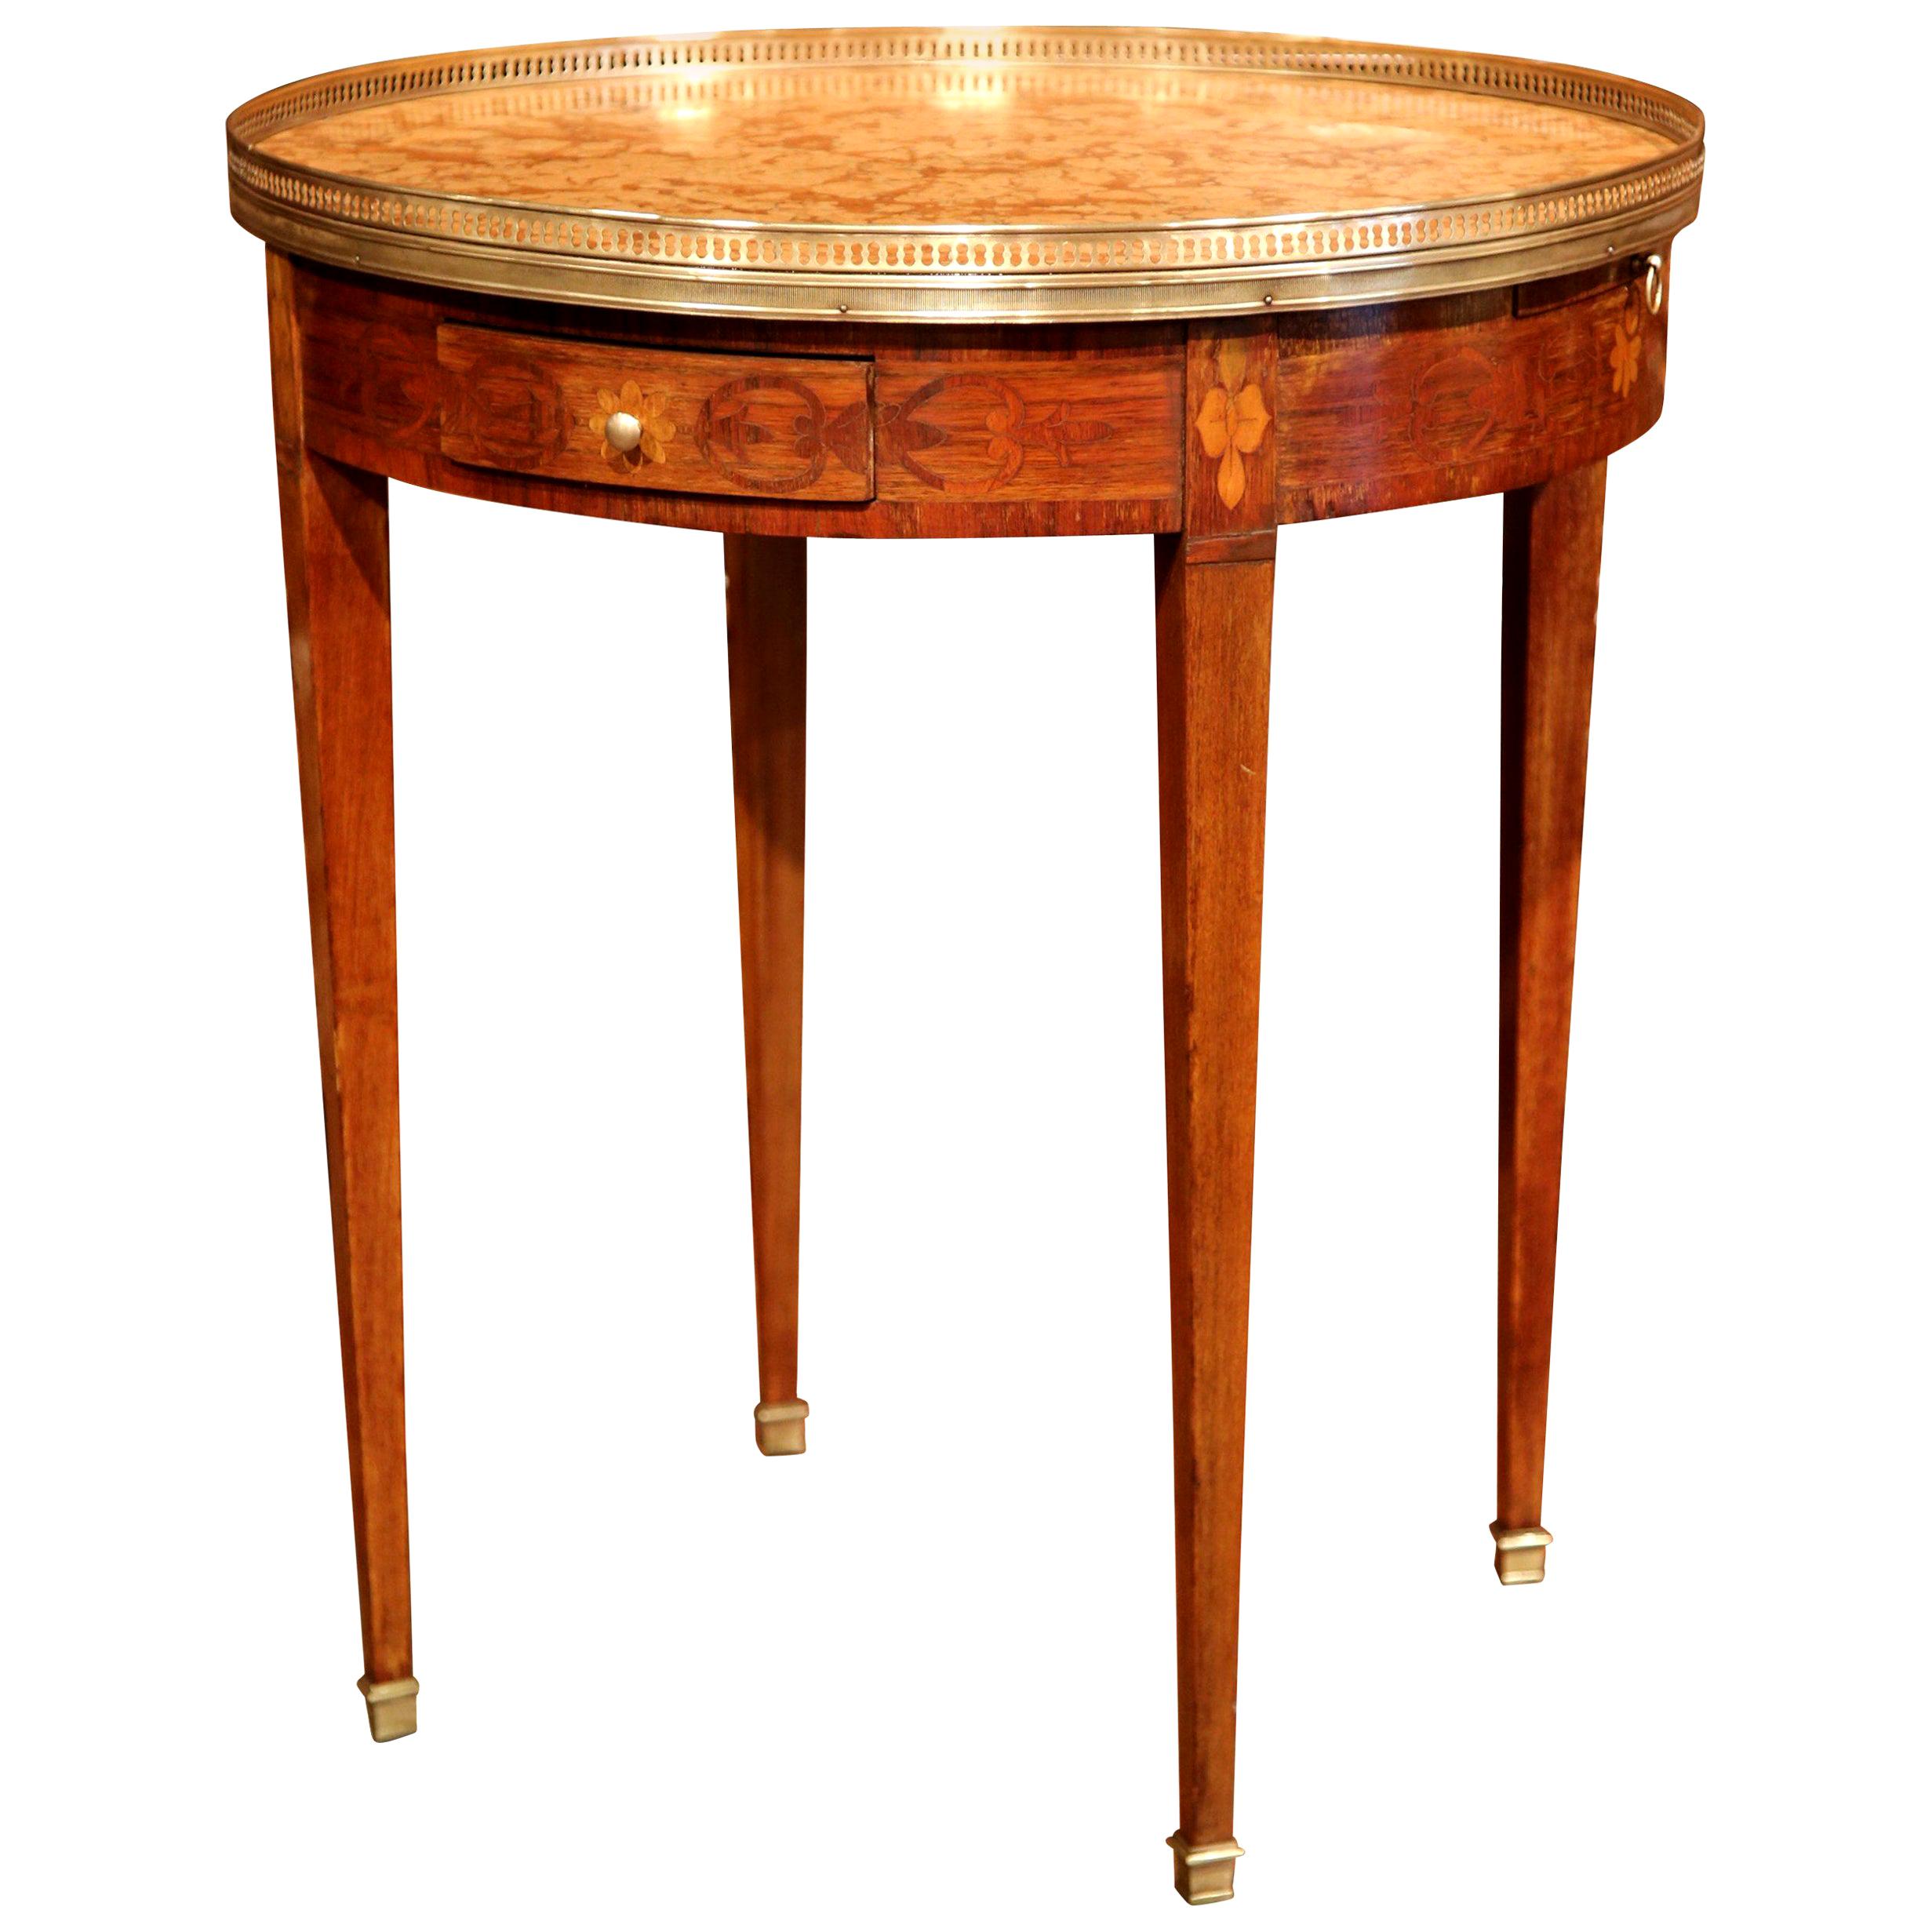 19th Century French Louis XVI Walnut Marquetry Gueridon with Marble Top